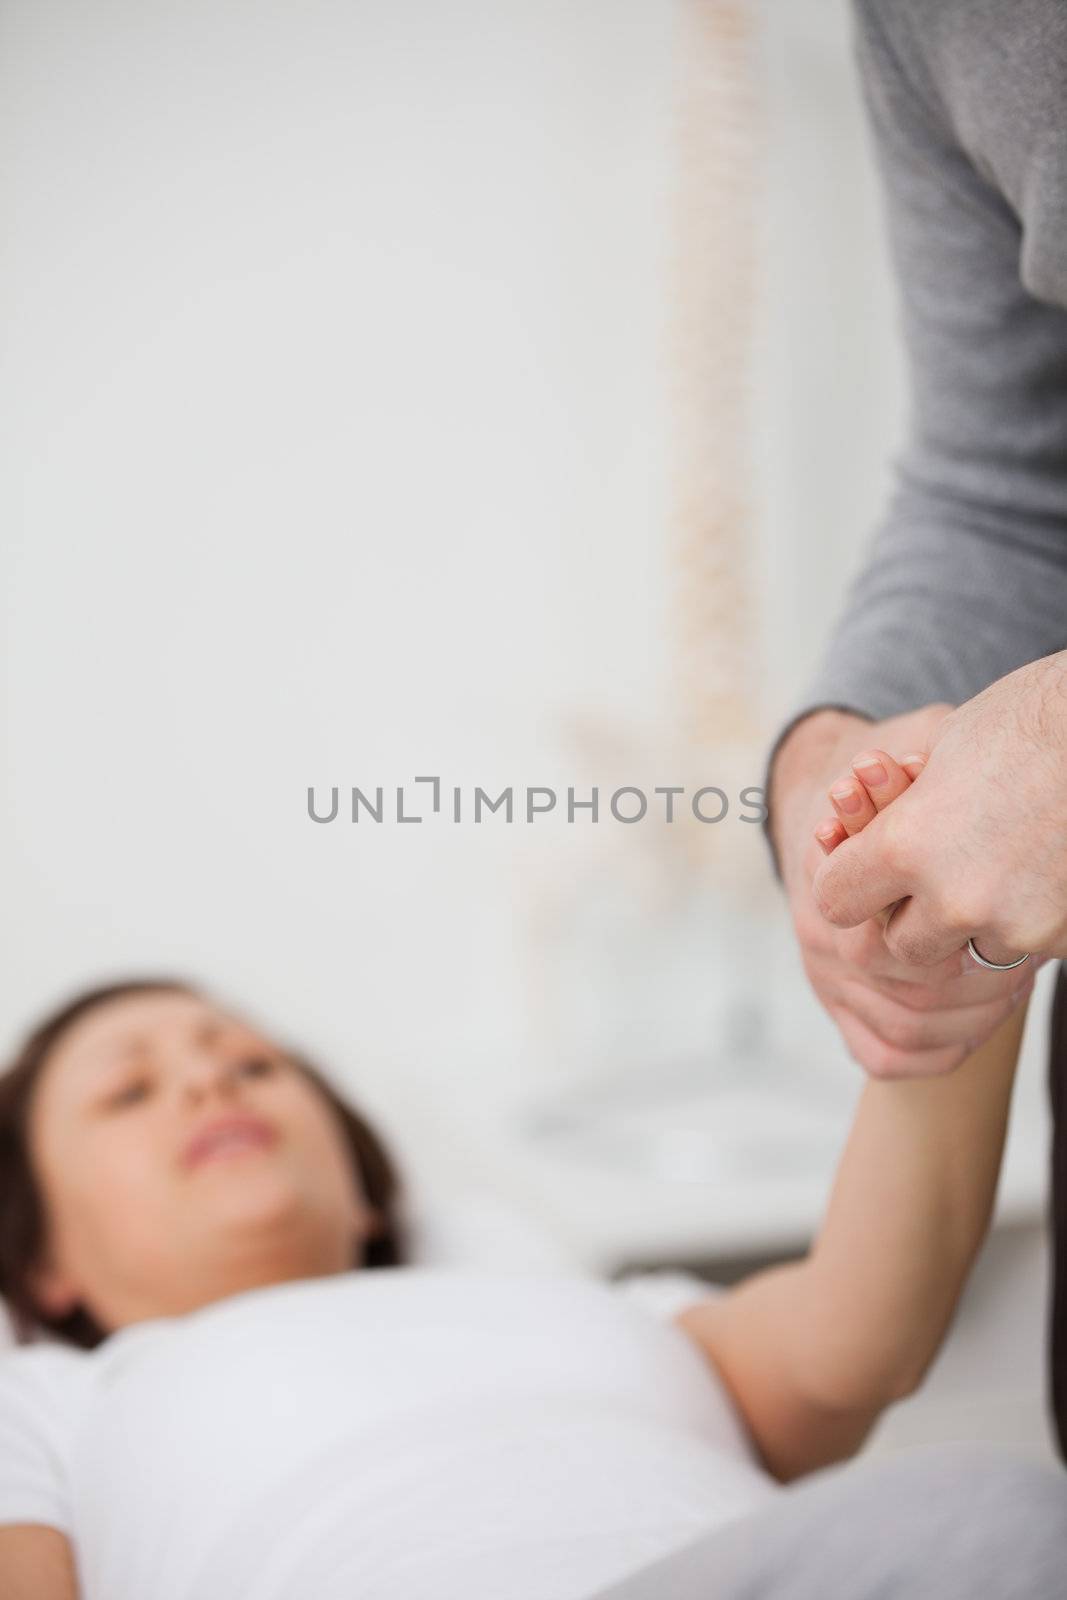 Physiotherapist holding a painful hand by Wavebreakmedia